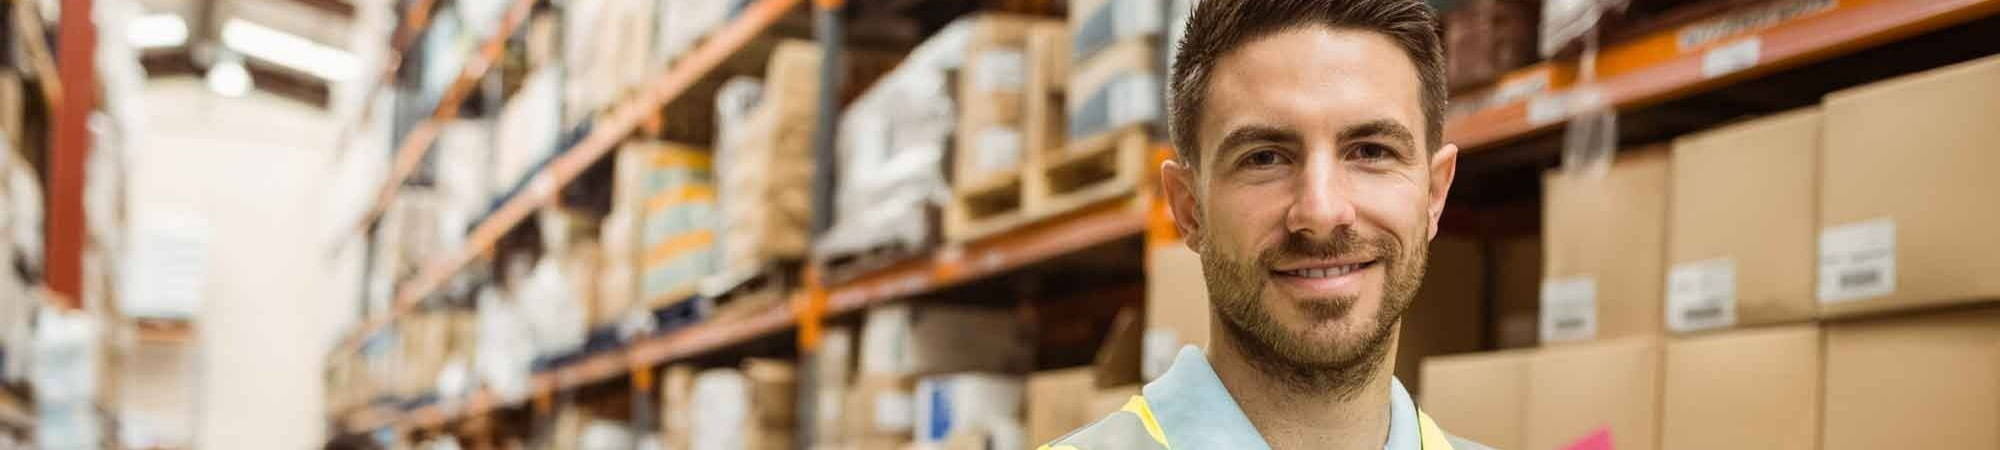 transport warehousing and logistics worker smiling 